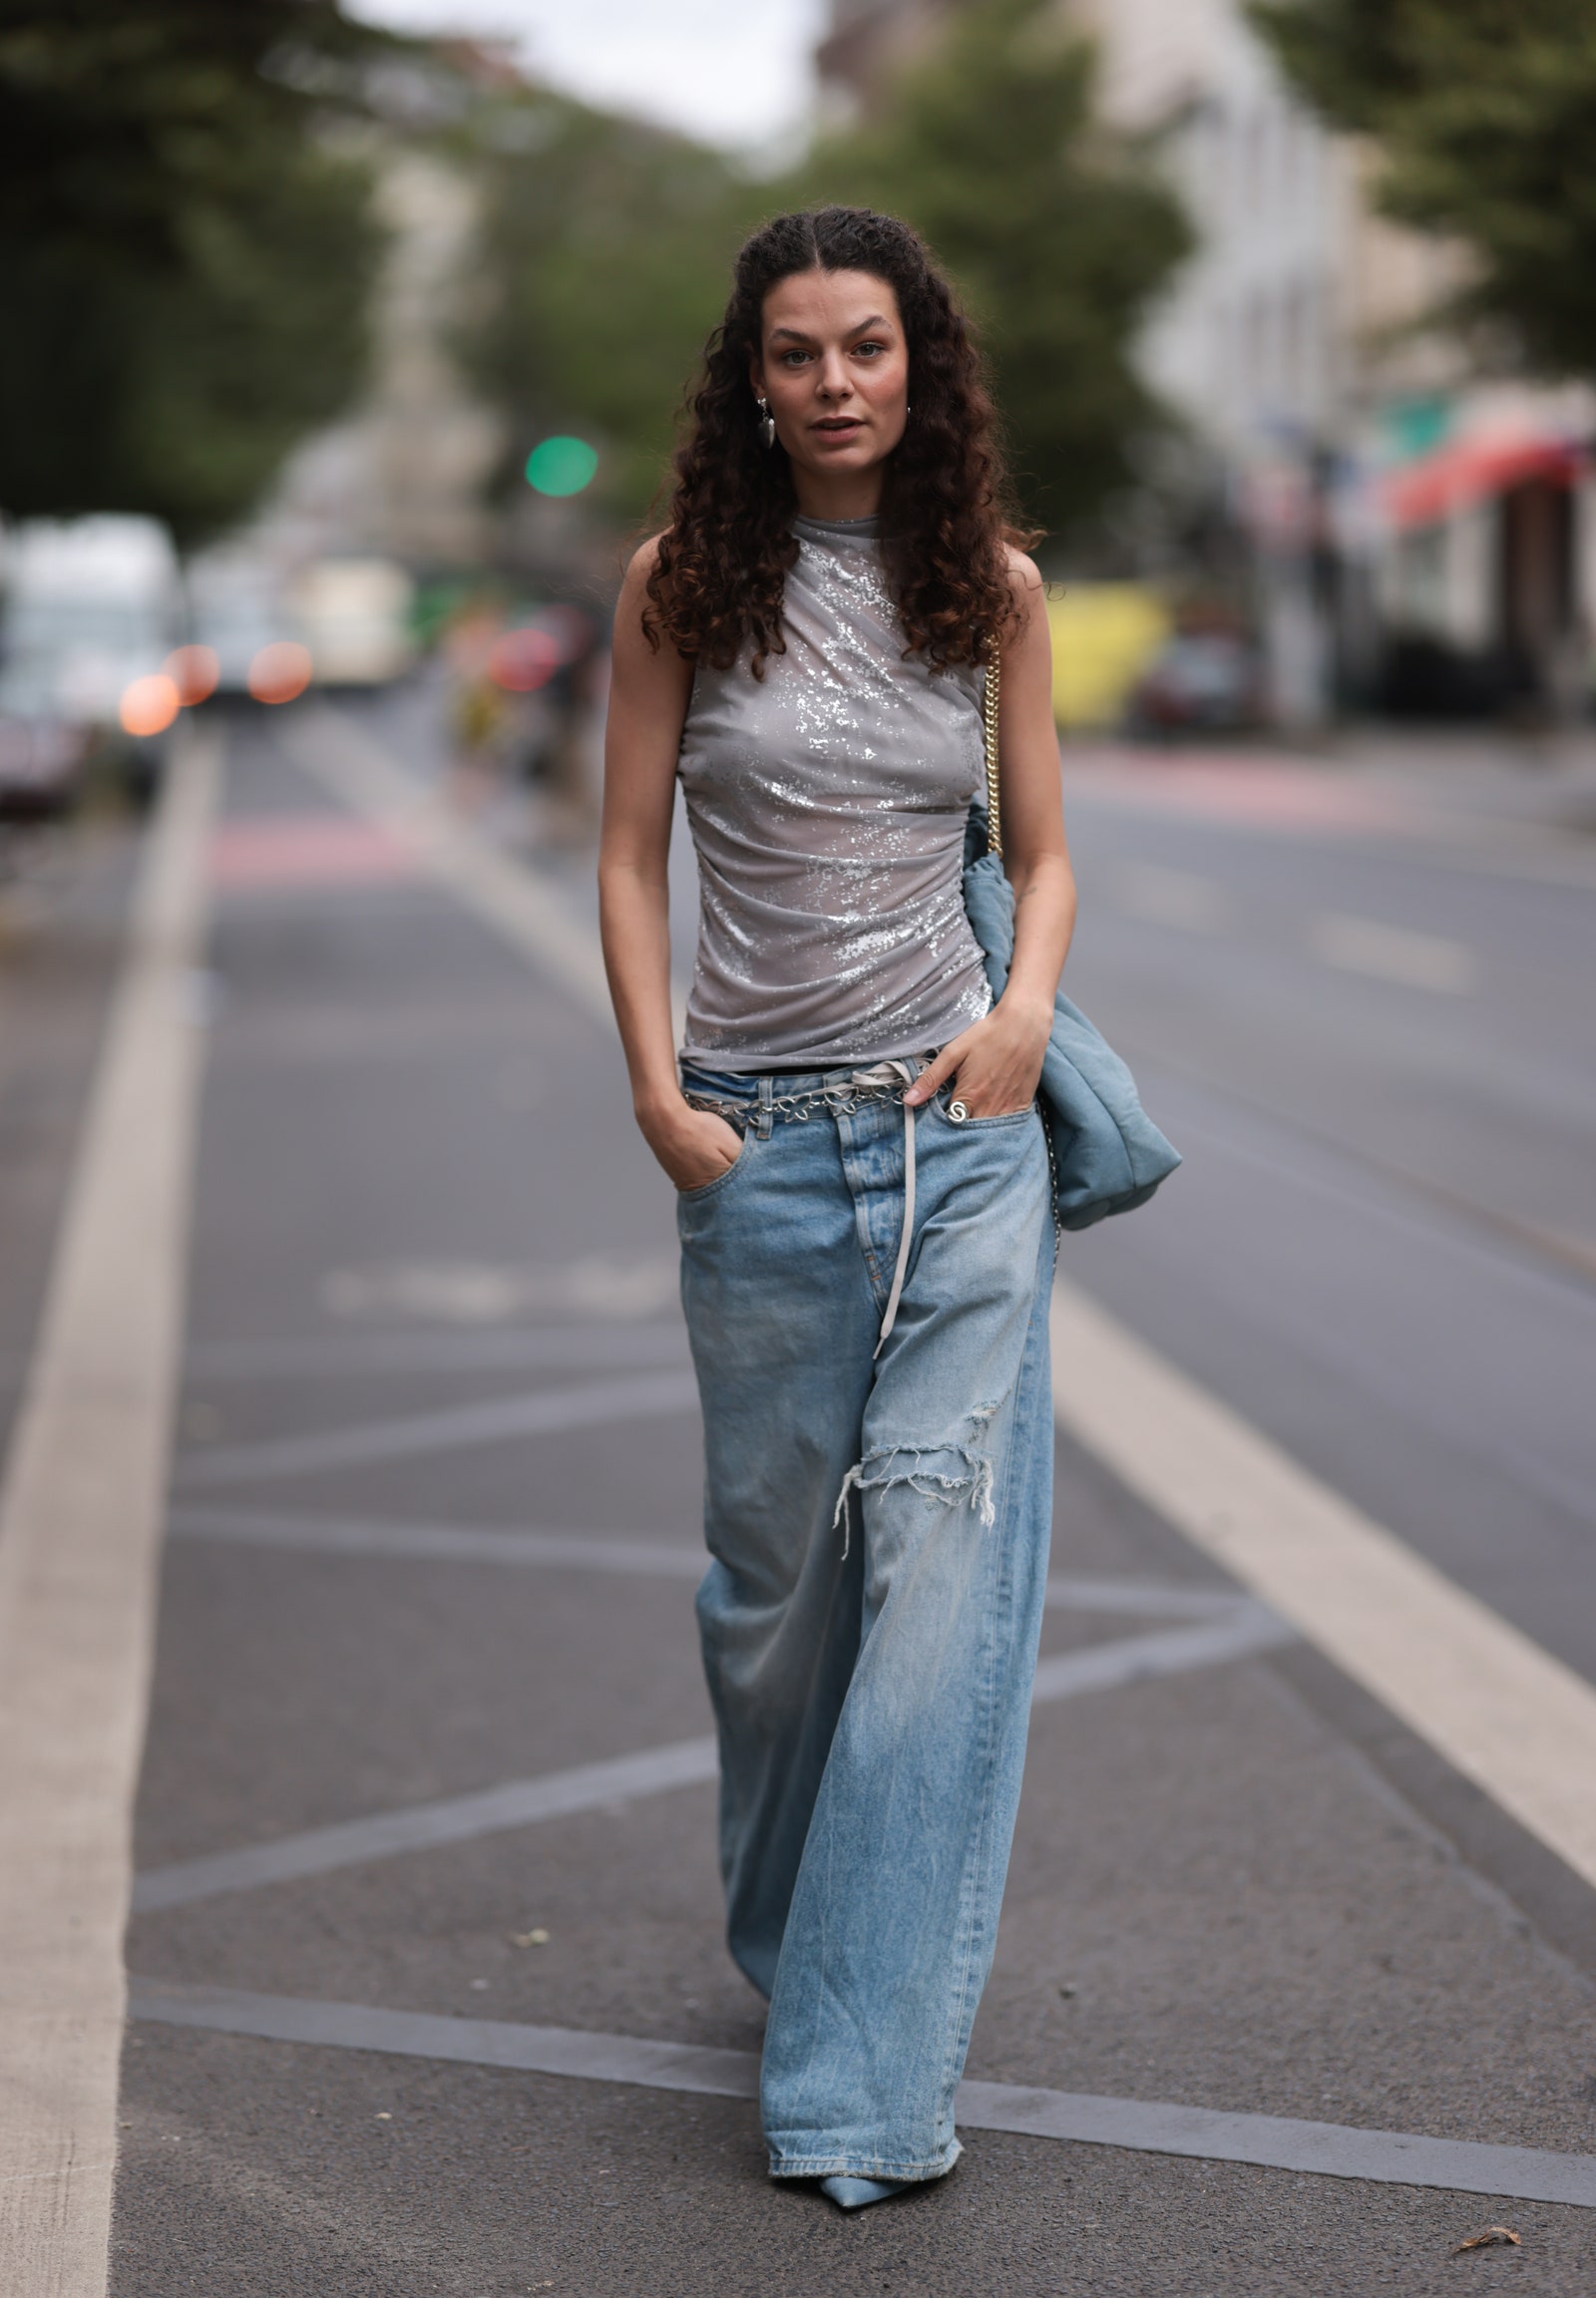 How To Dress Up Denim According To 5 StreetStyle Stars